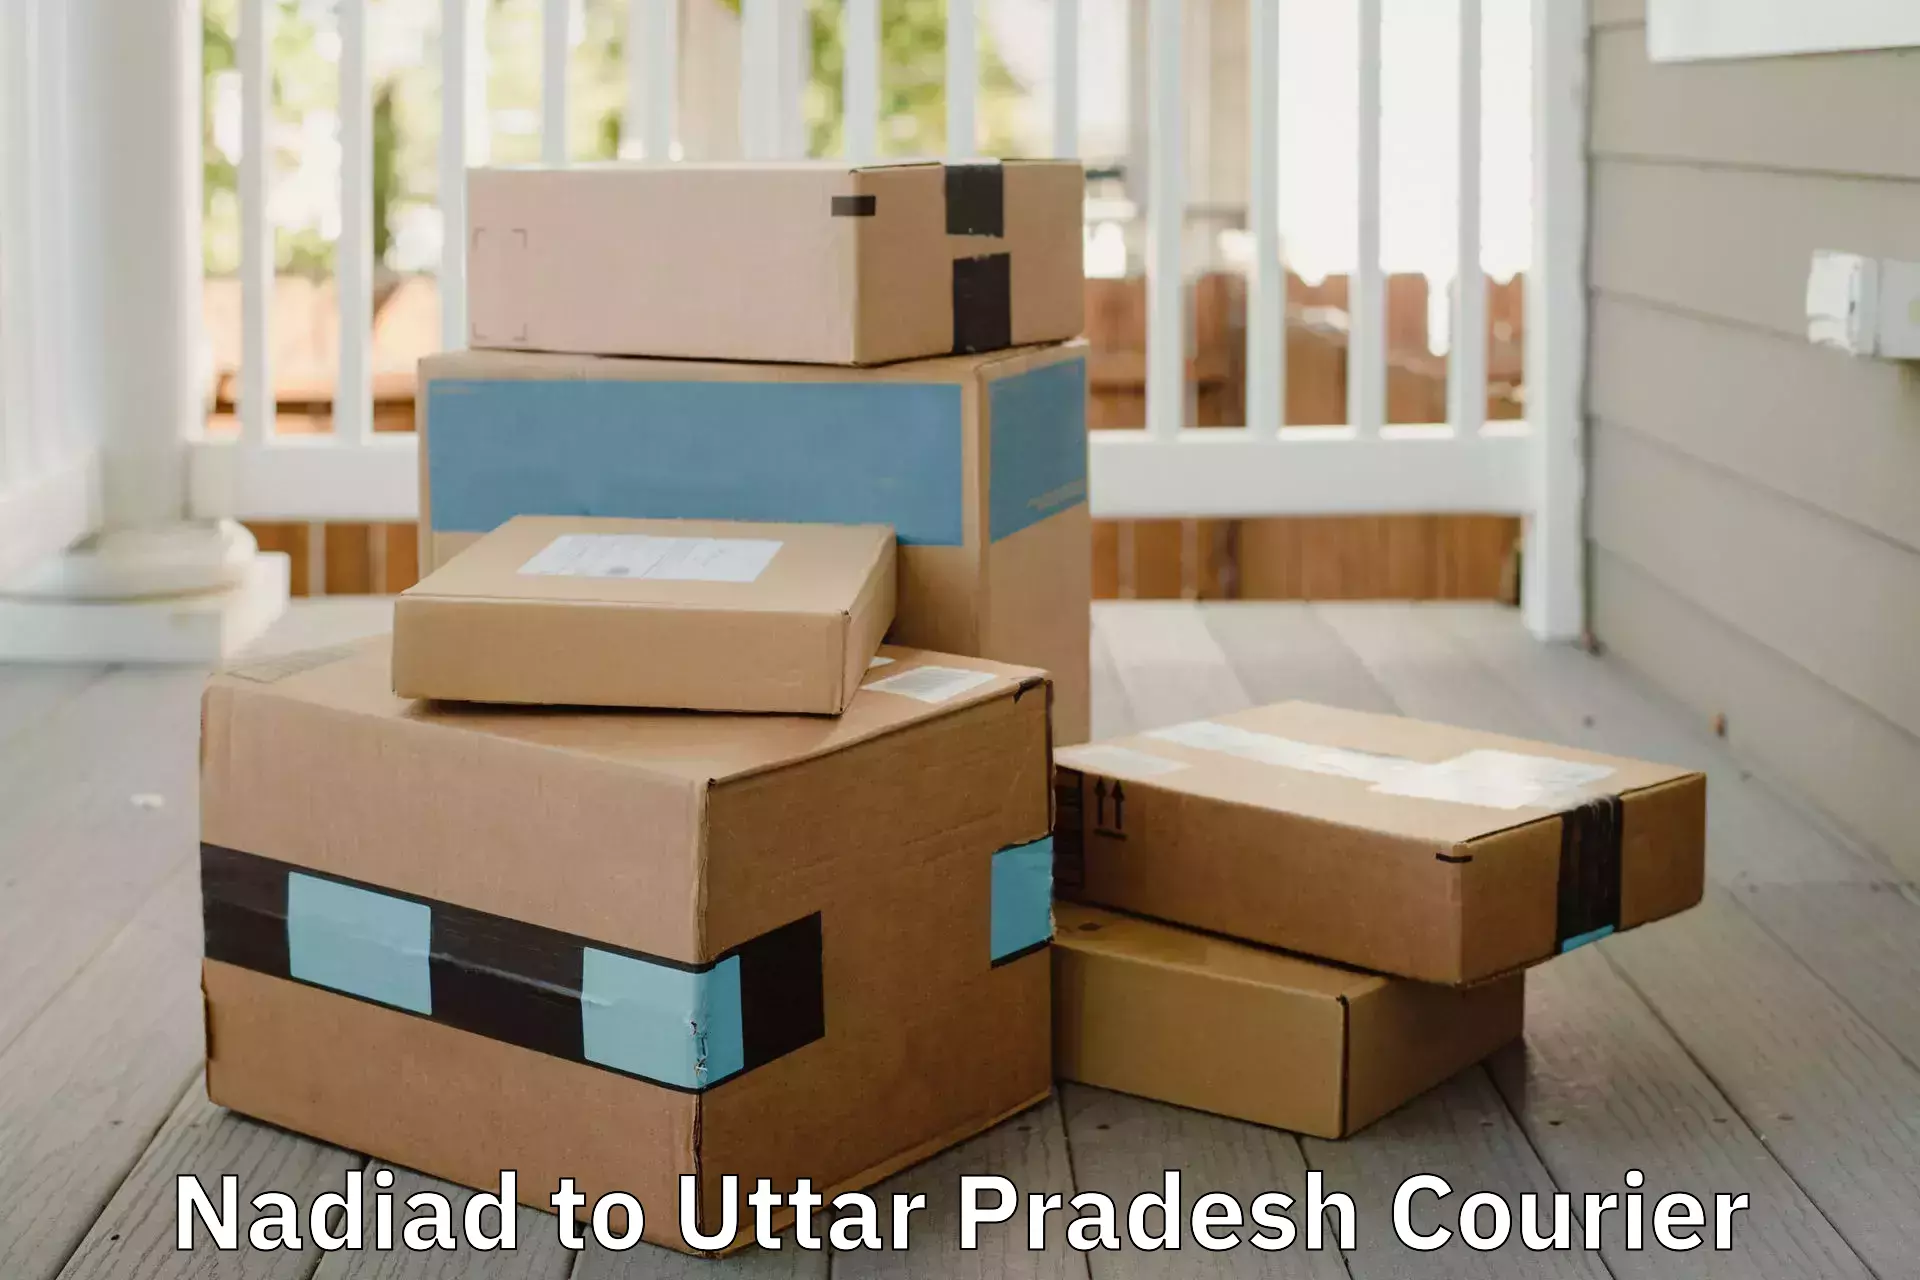 Furniture relocation experts Nadiad to Anpara